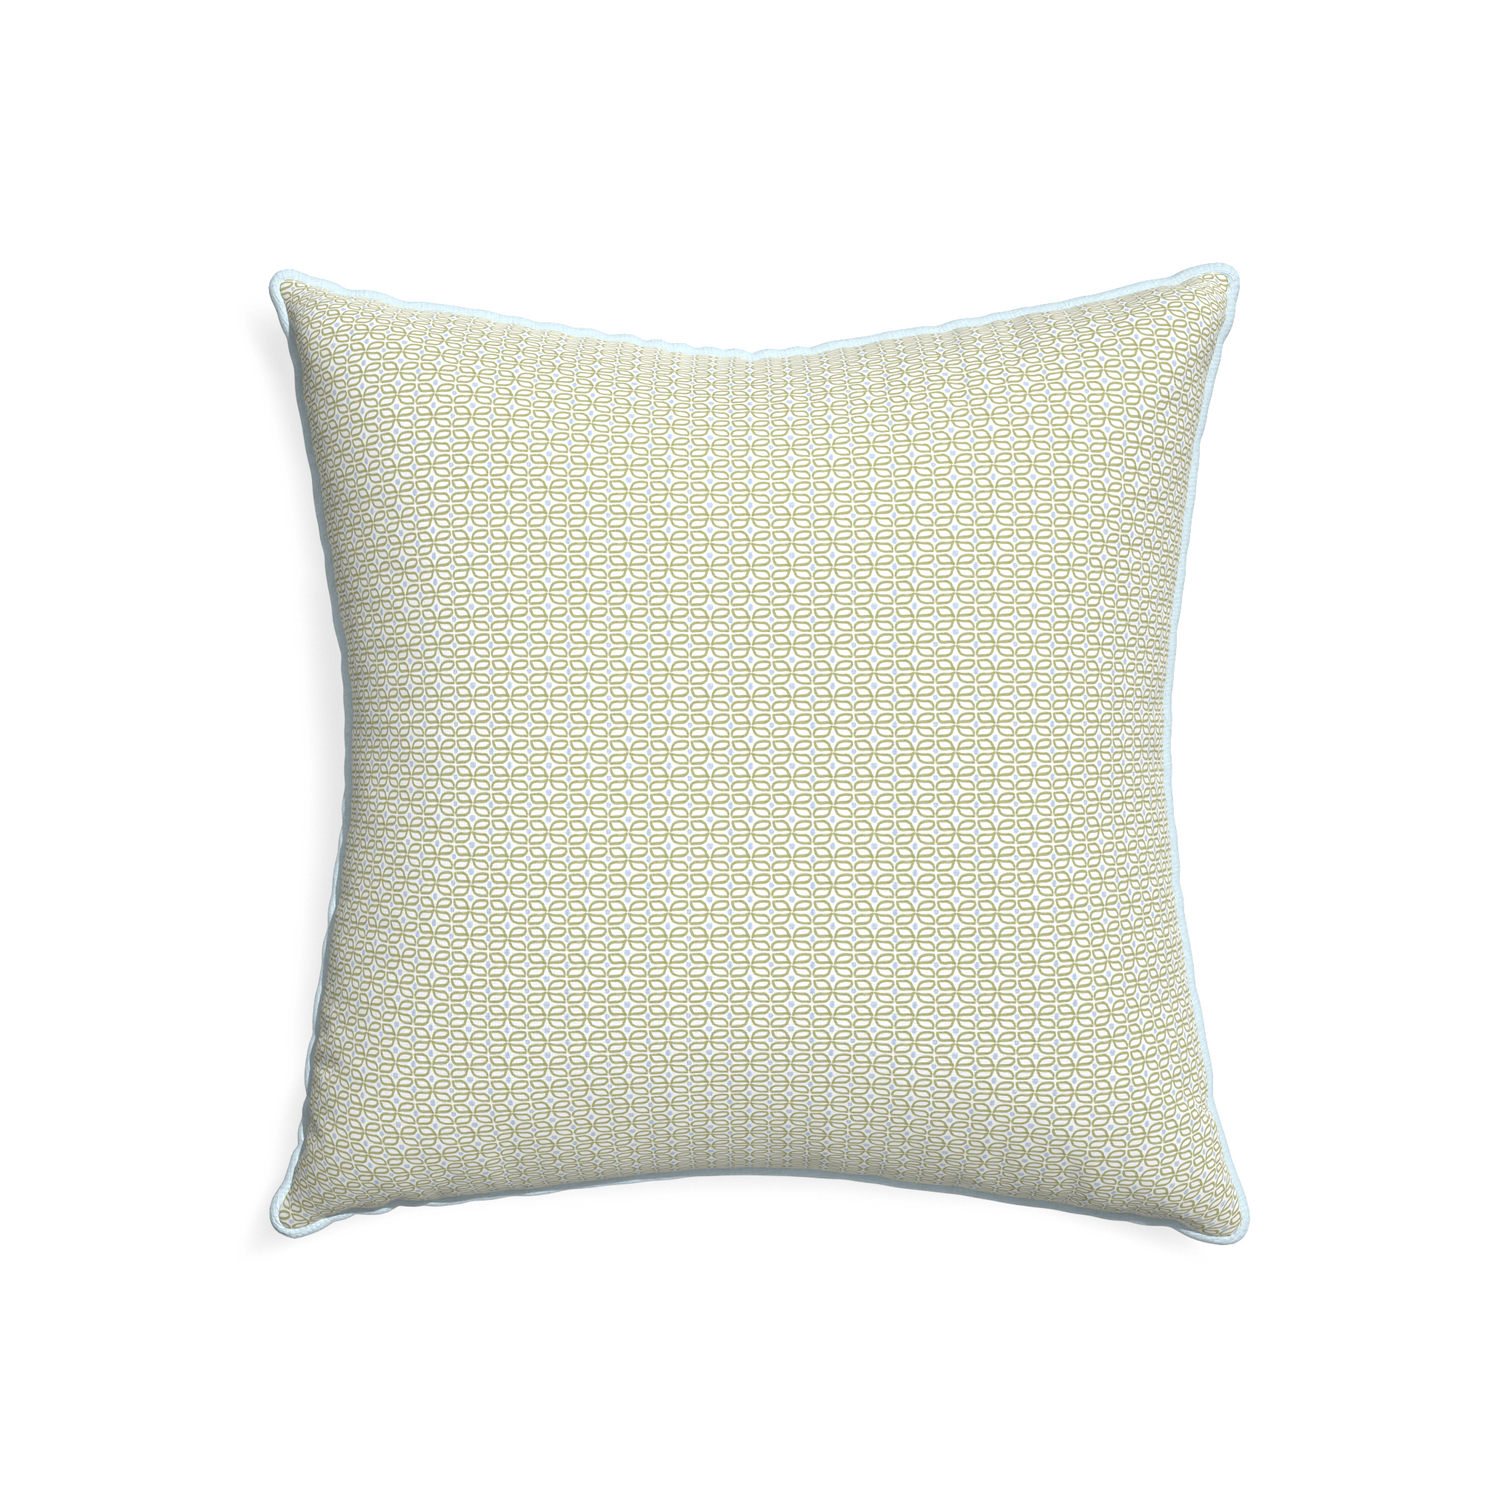 22-square loomi moss custom pillow with powder piping on white background